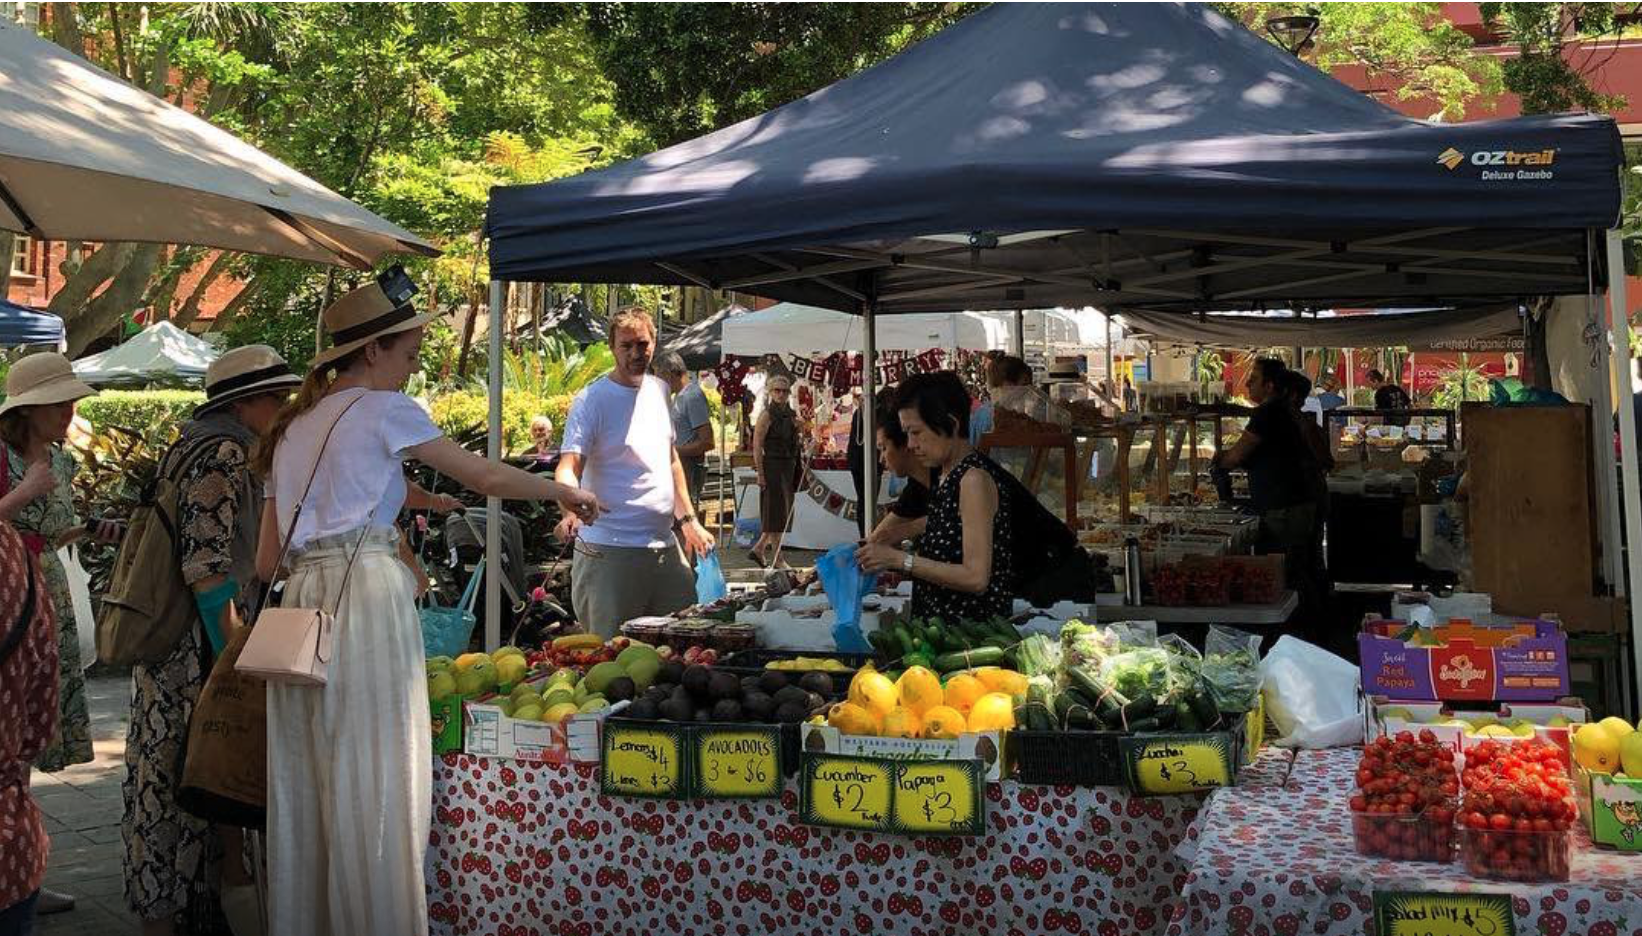 Organic Food Markets-Hornsby